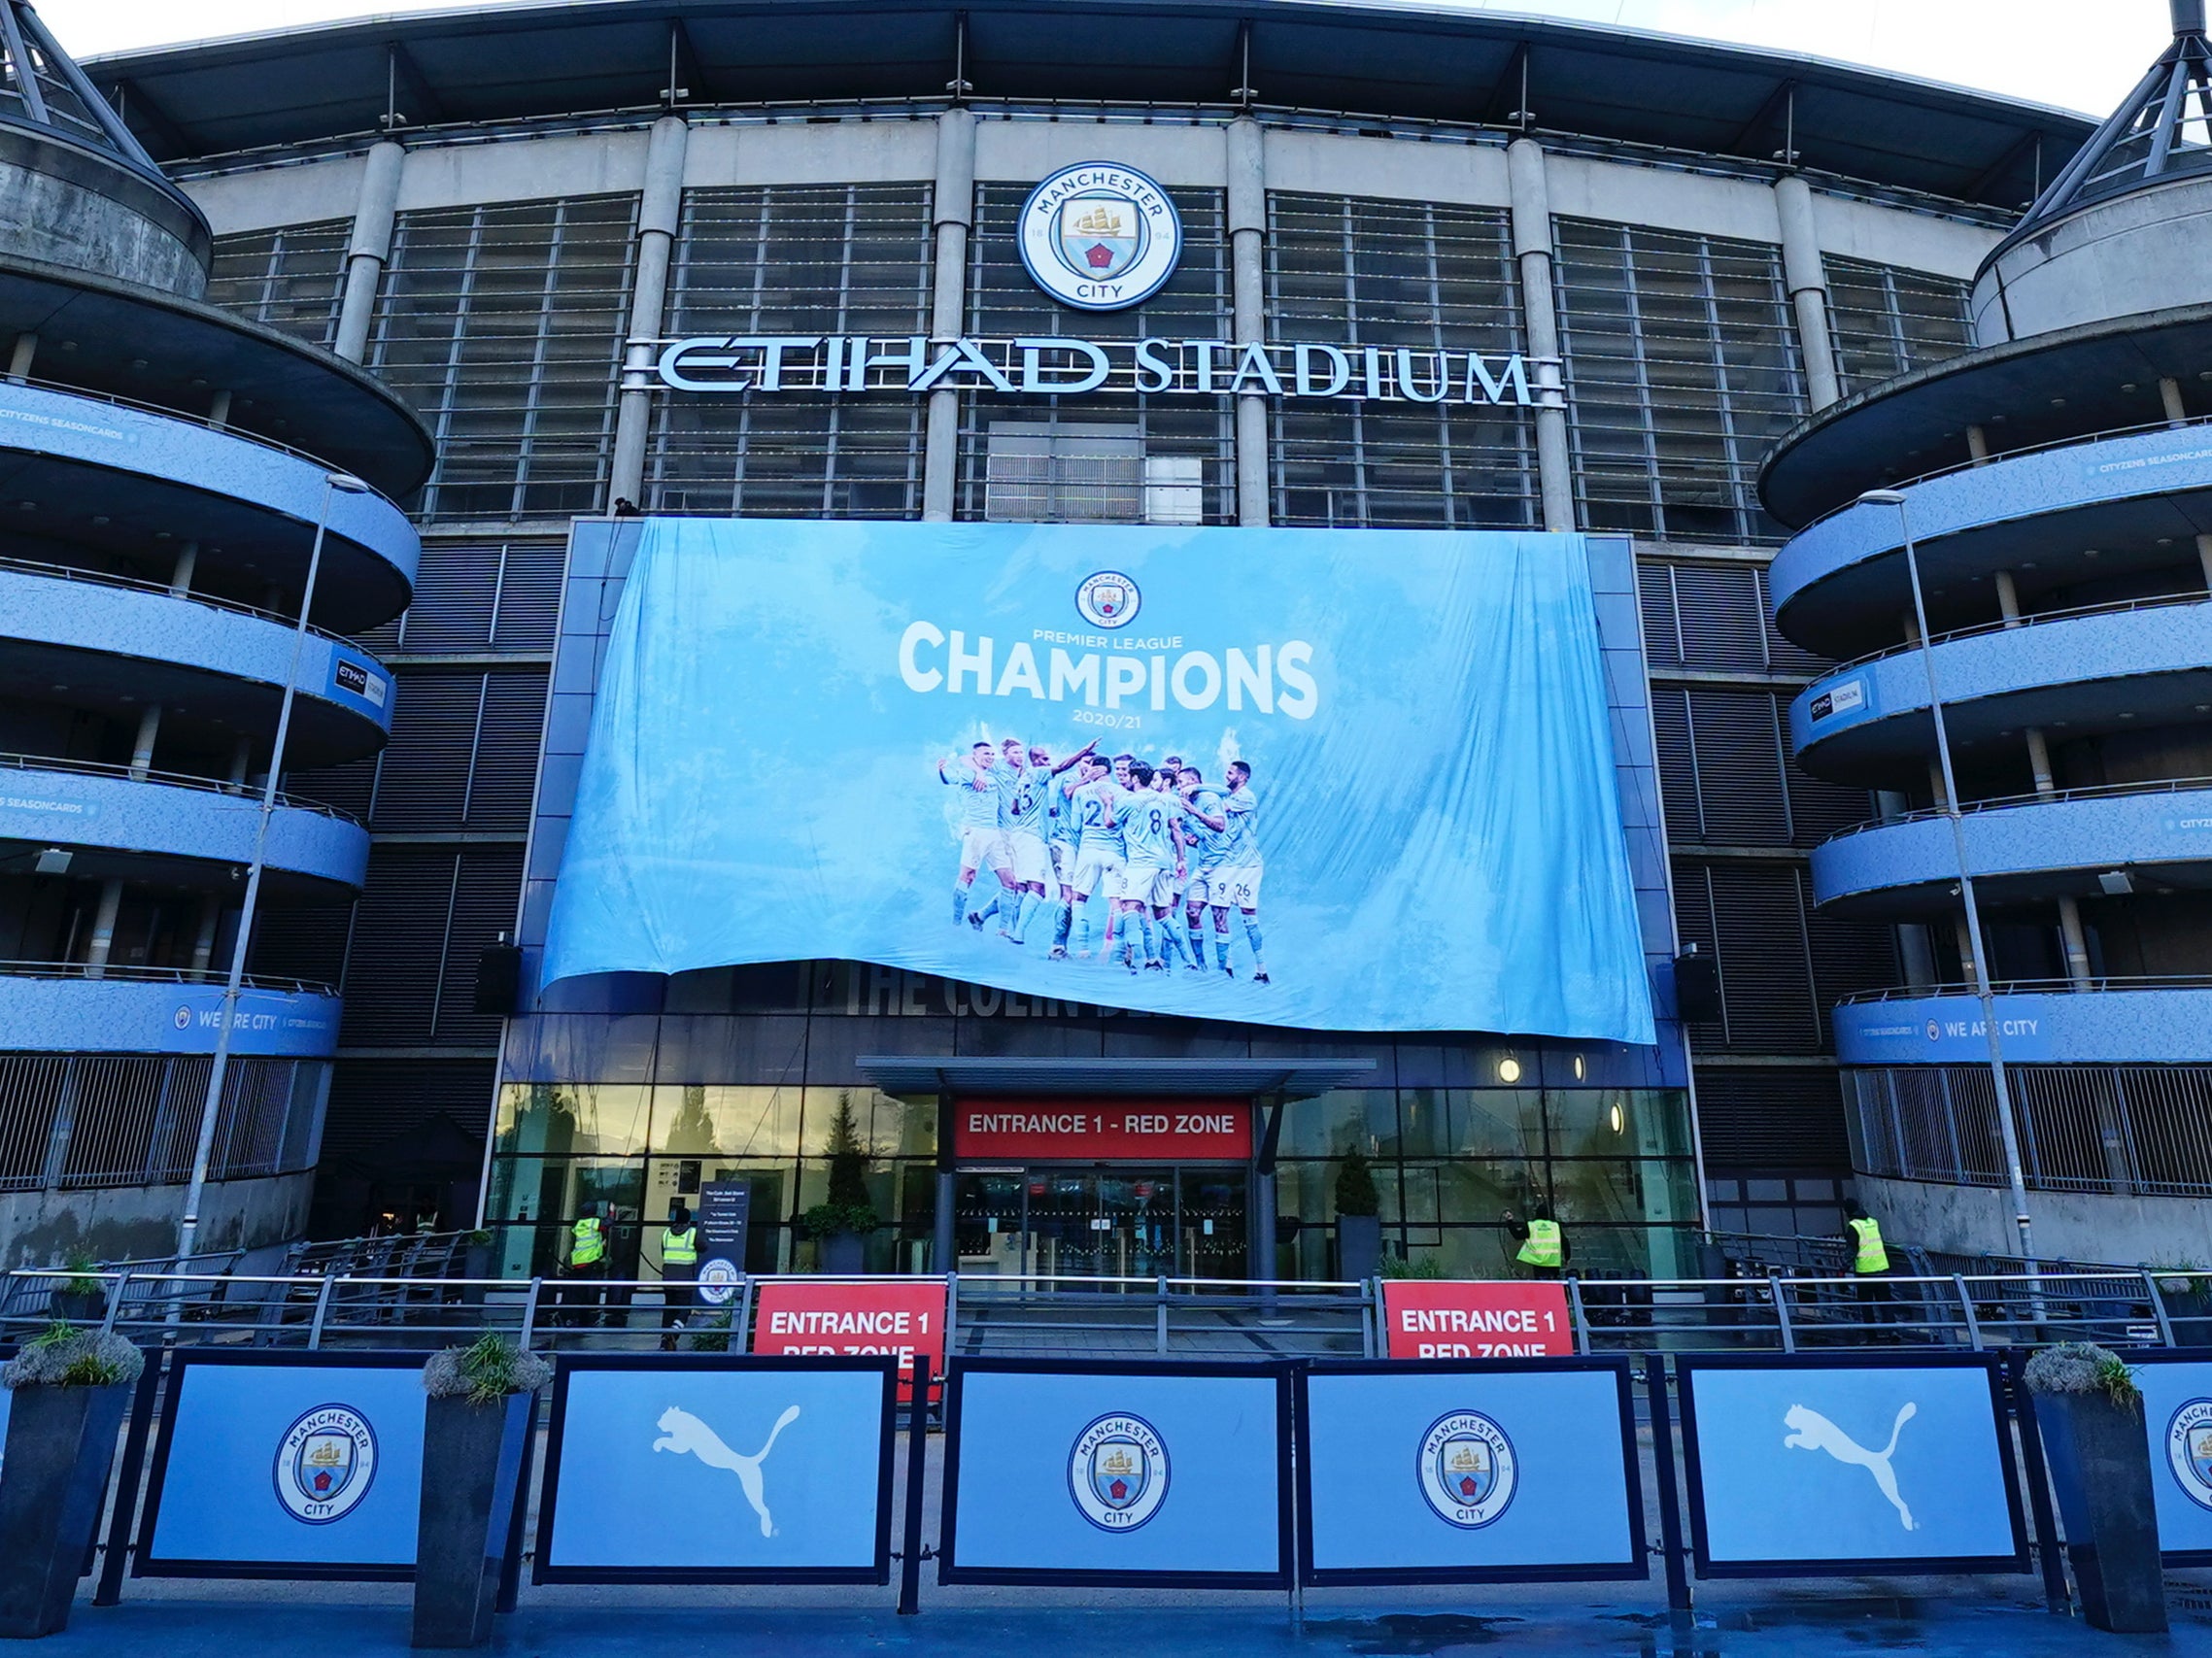 A Premier League champions banner is unfurled at Etihad Stadium